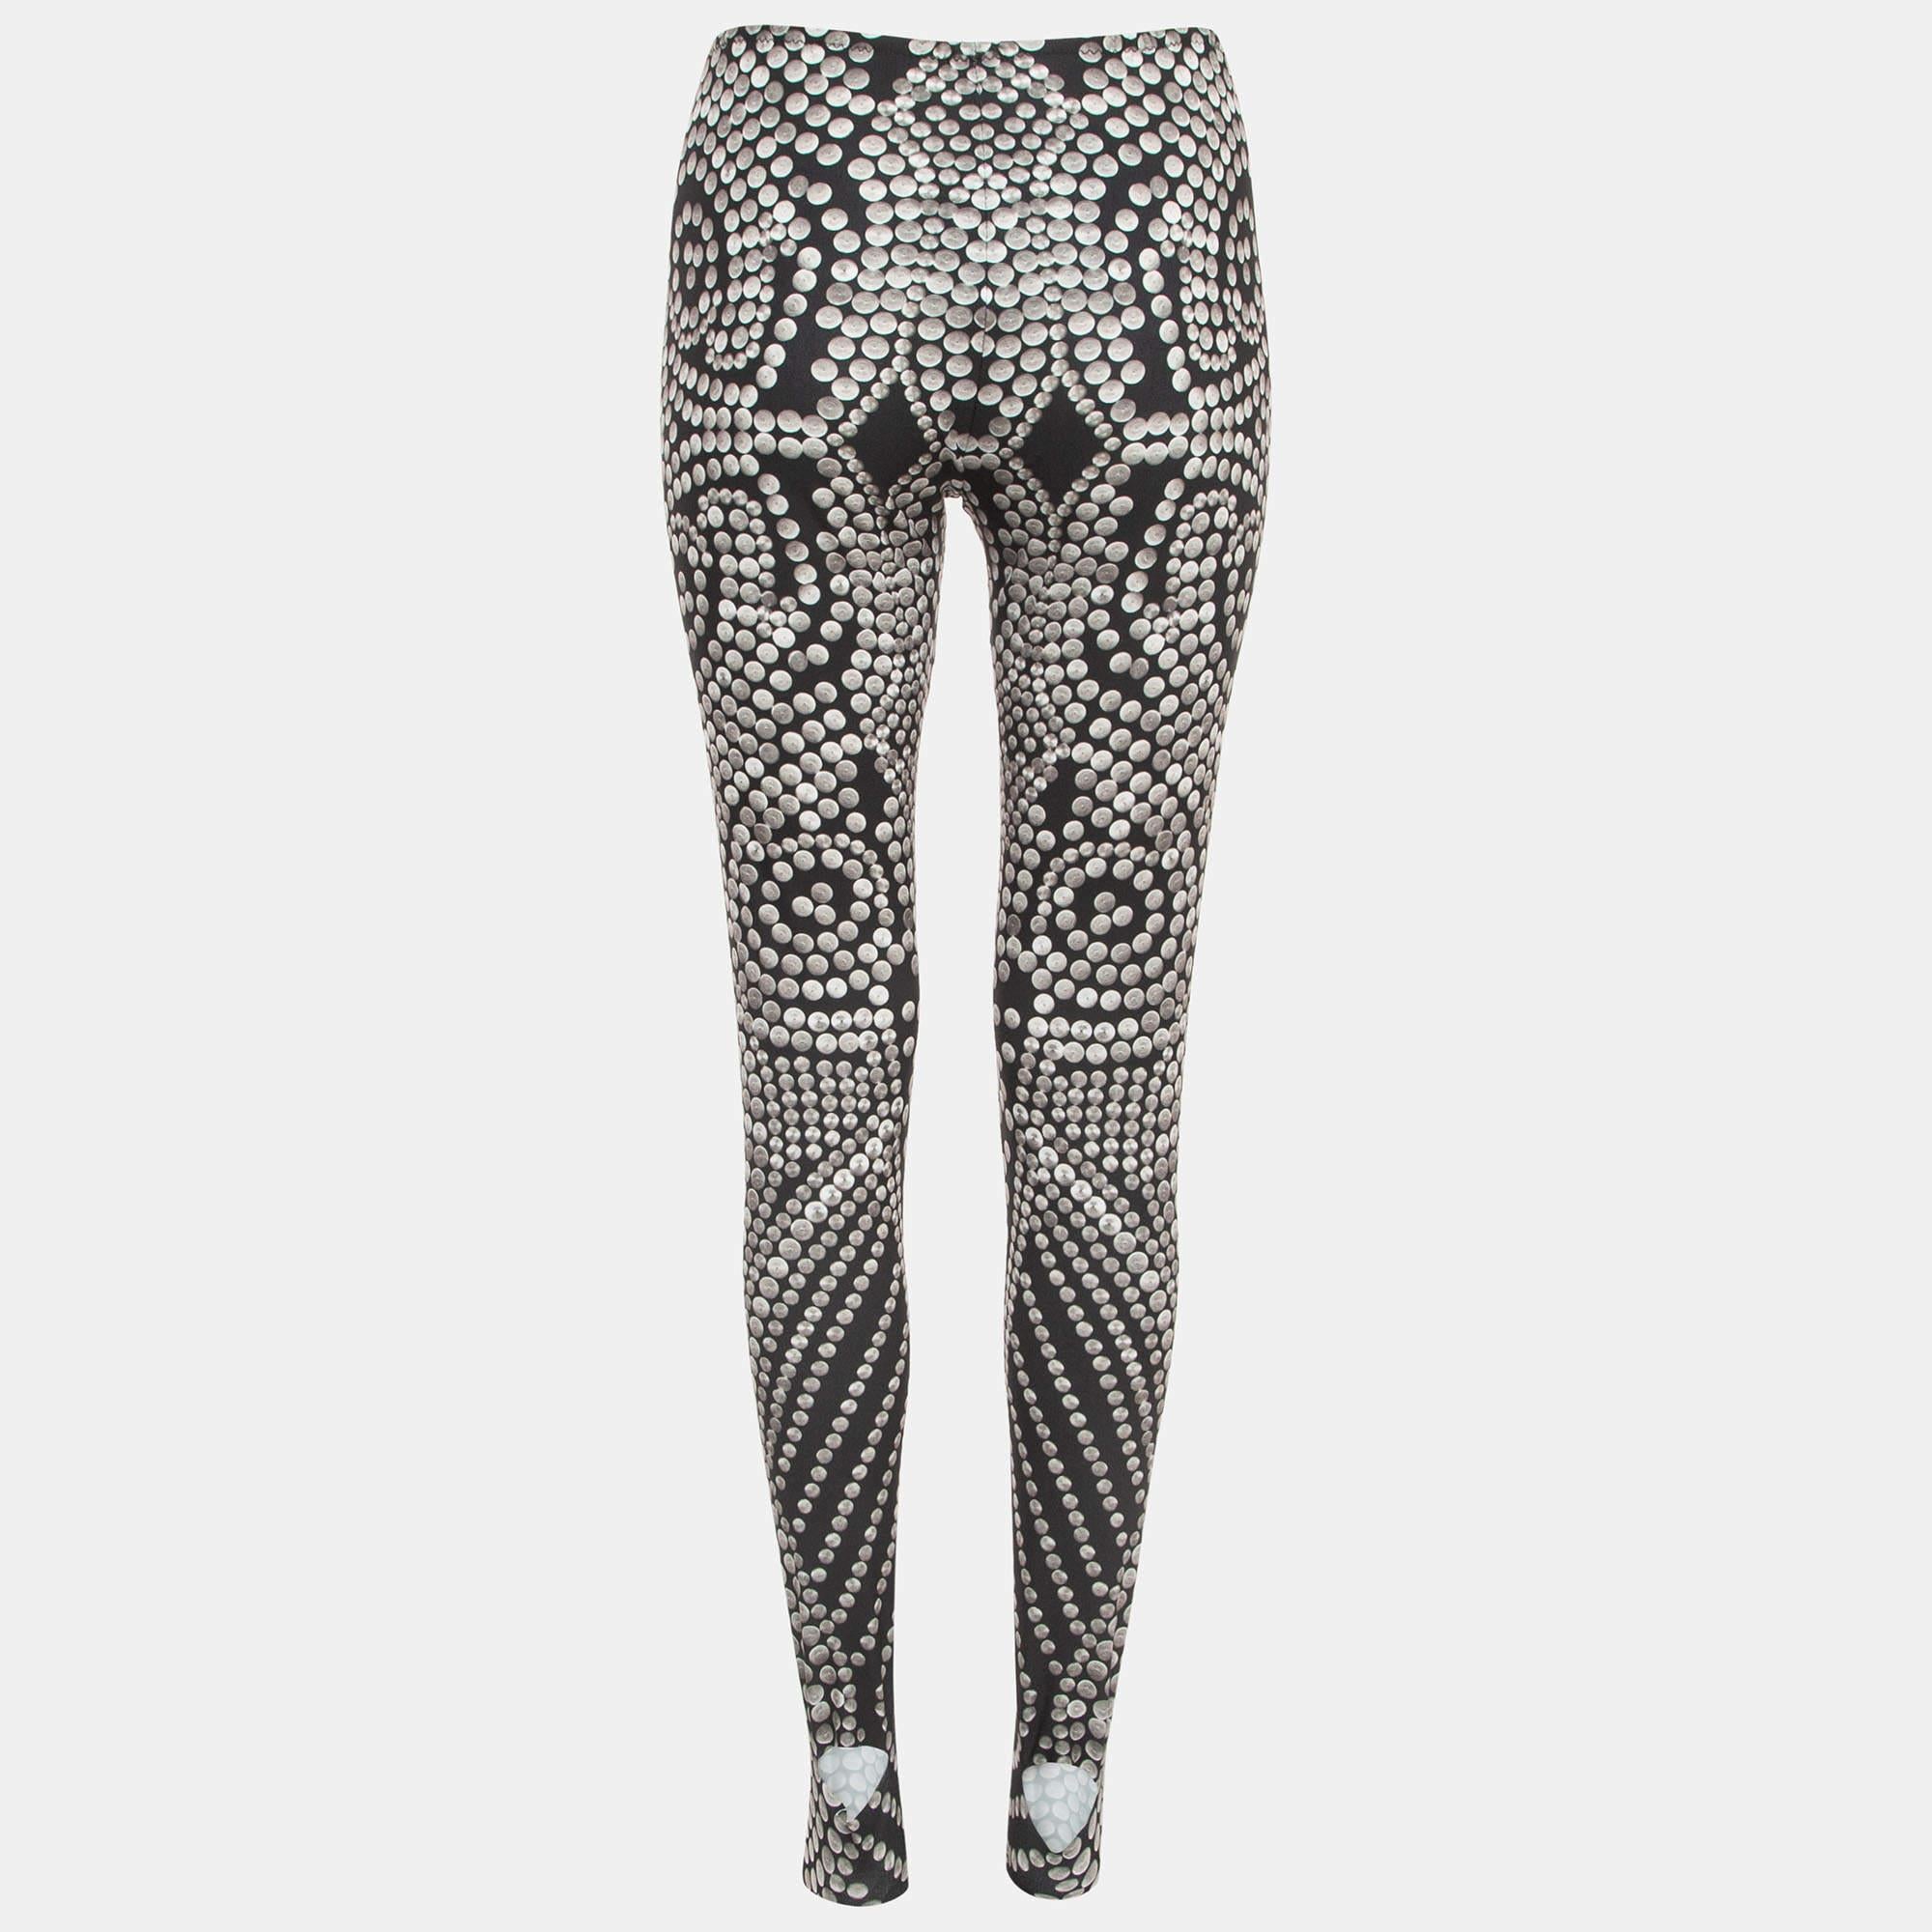 Norma Kamali's leggings blend style and comfort seamlessly. Crafted from a high-quality stretch knit fabric, these leggings feature a chic black print. The footie design adds a fashionable touch, making them a versatile and trendy wardrobe essential